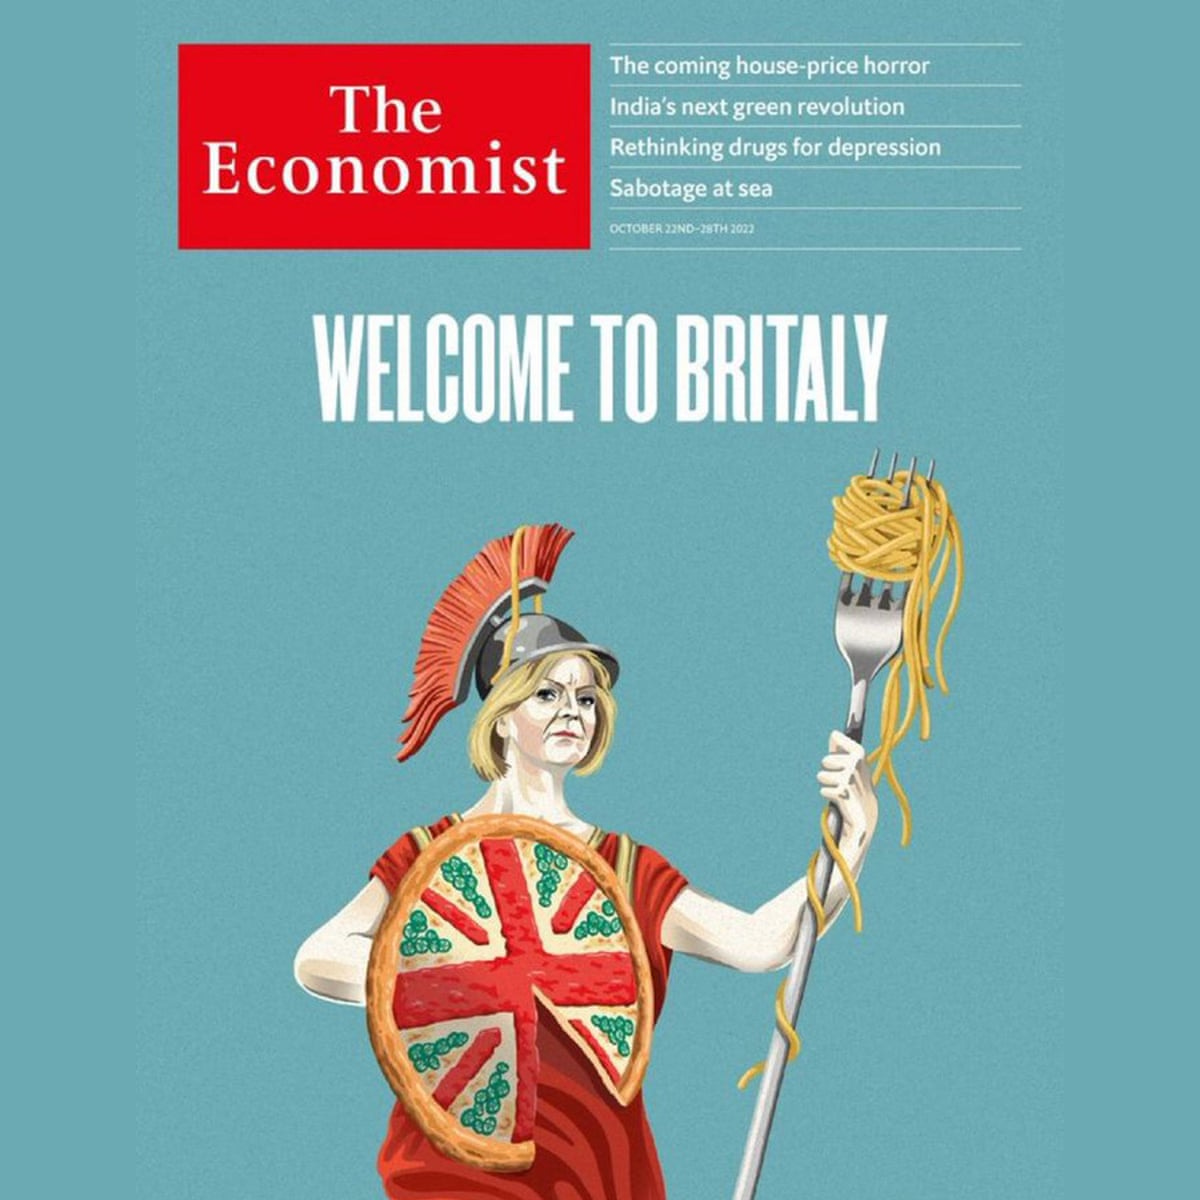 Italy slams Economist 'Welcome to Britaly' cover for rehashing stereotypes  | Italy | The Guardian